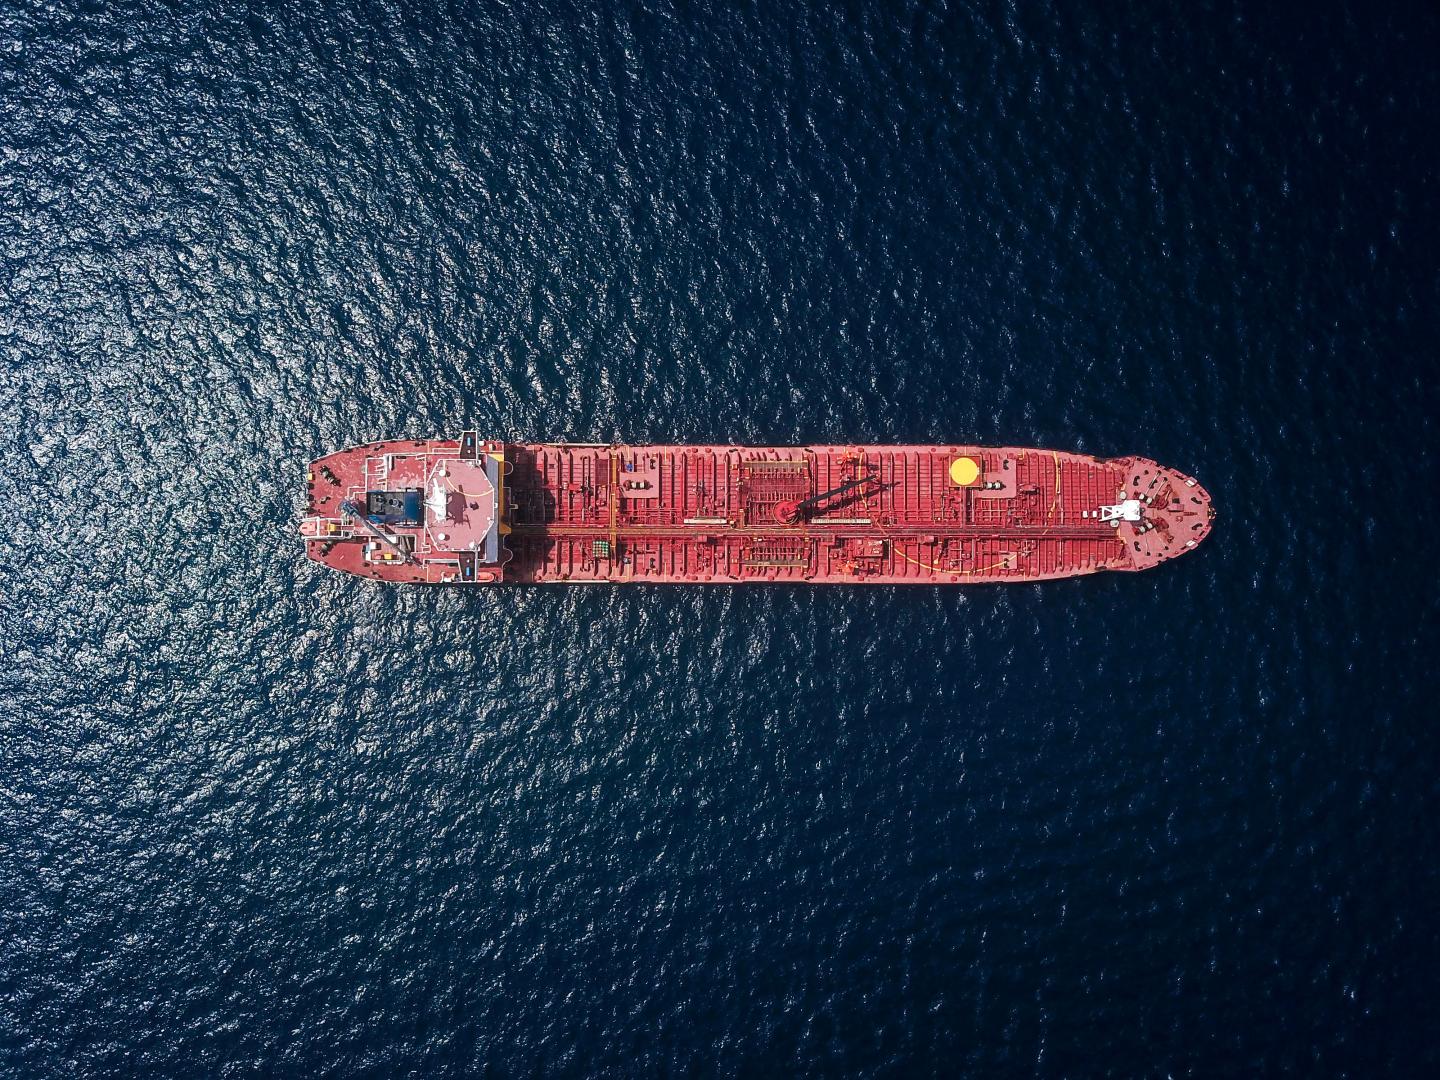 Maritime vessel in the ocean (Photo by Shaah Shahidh on Unsplash)